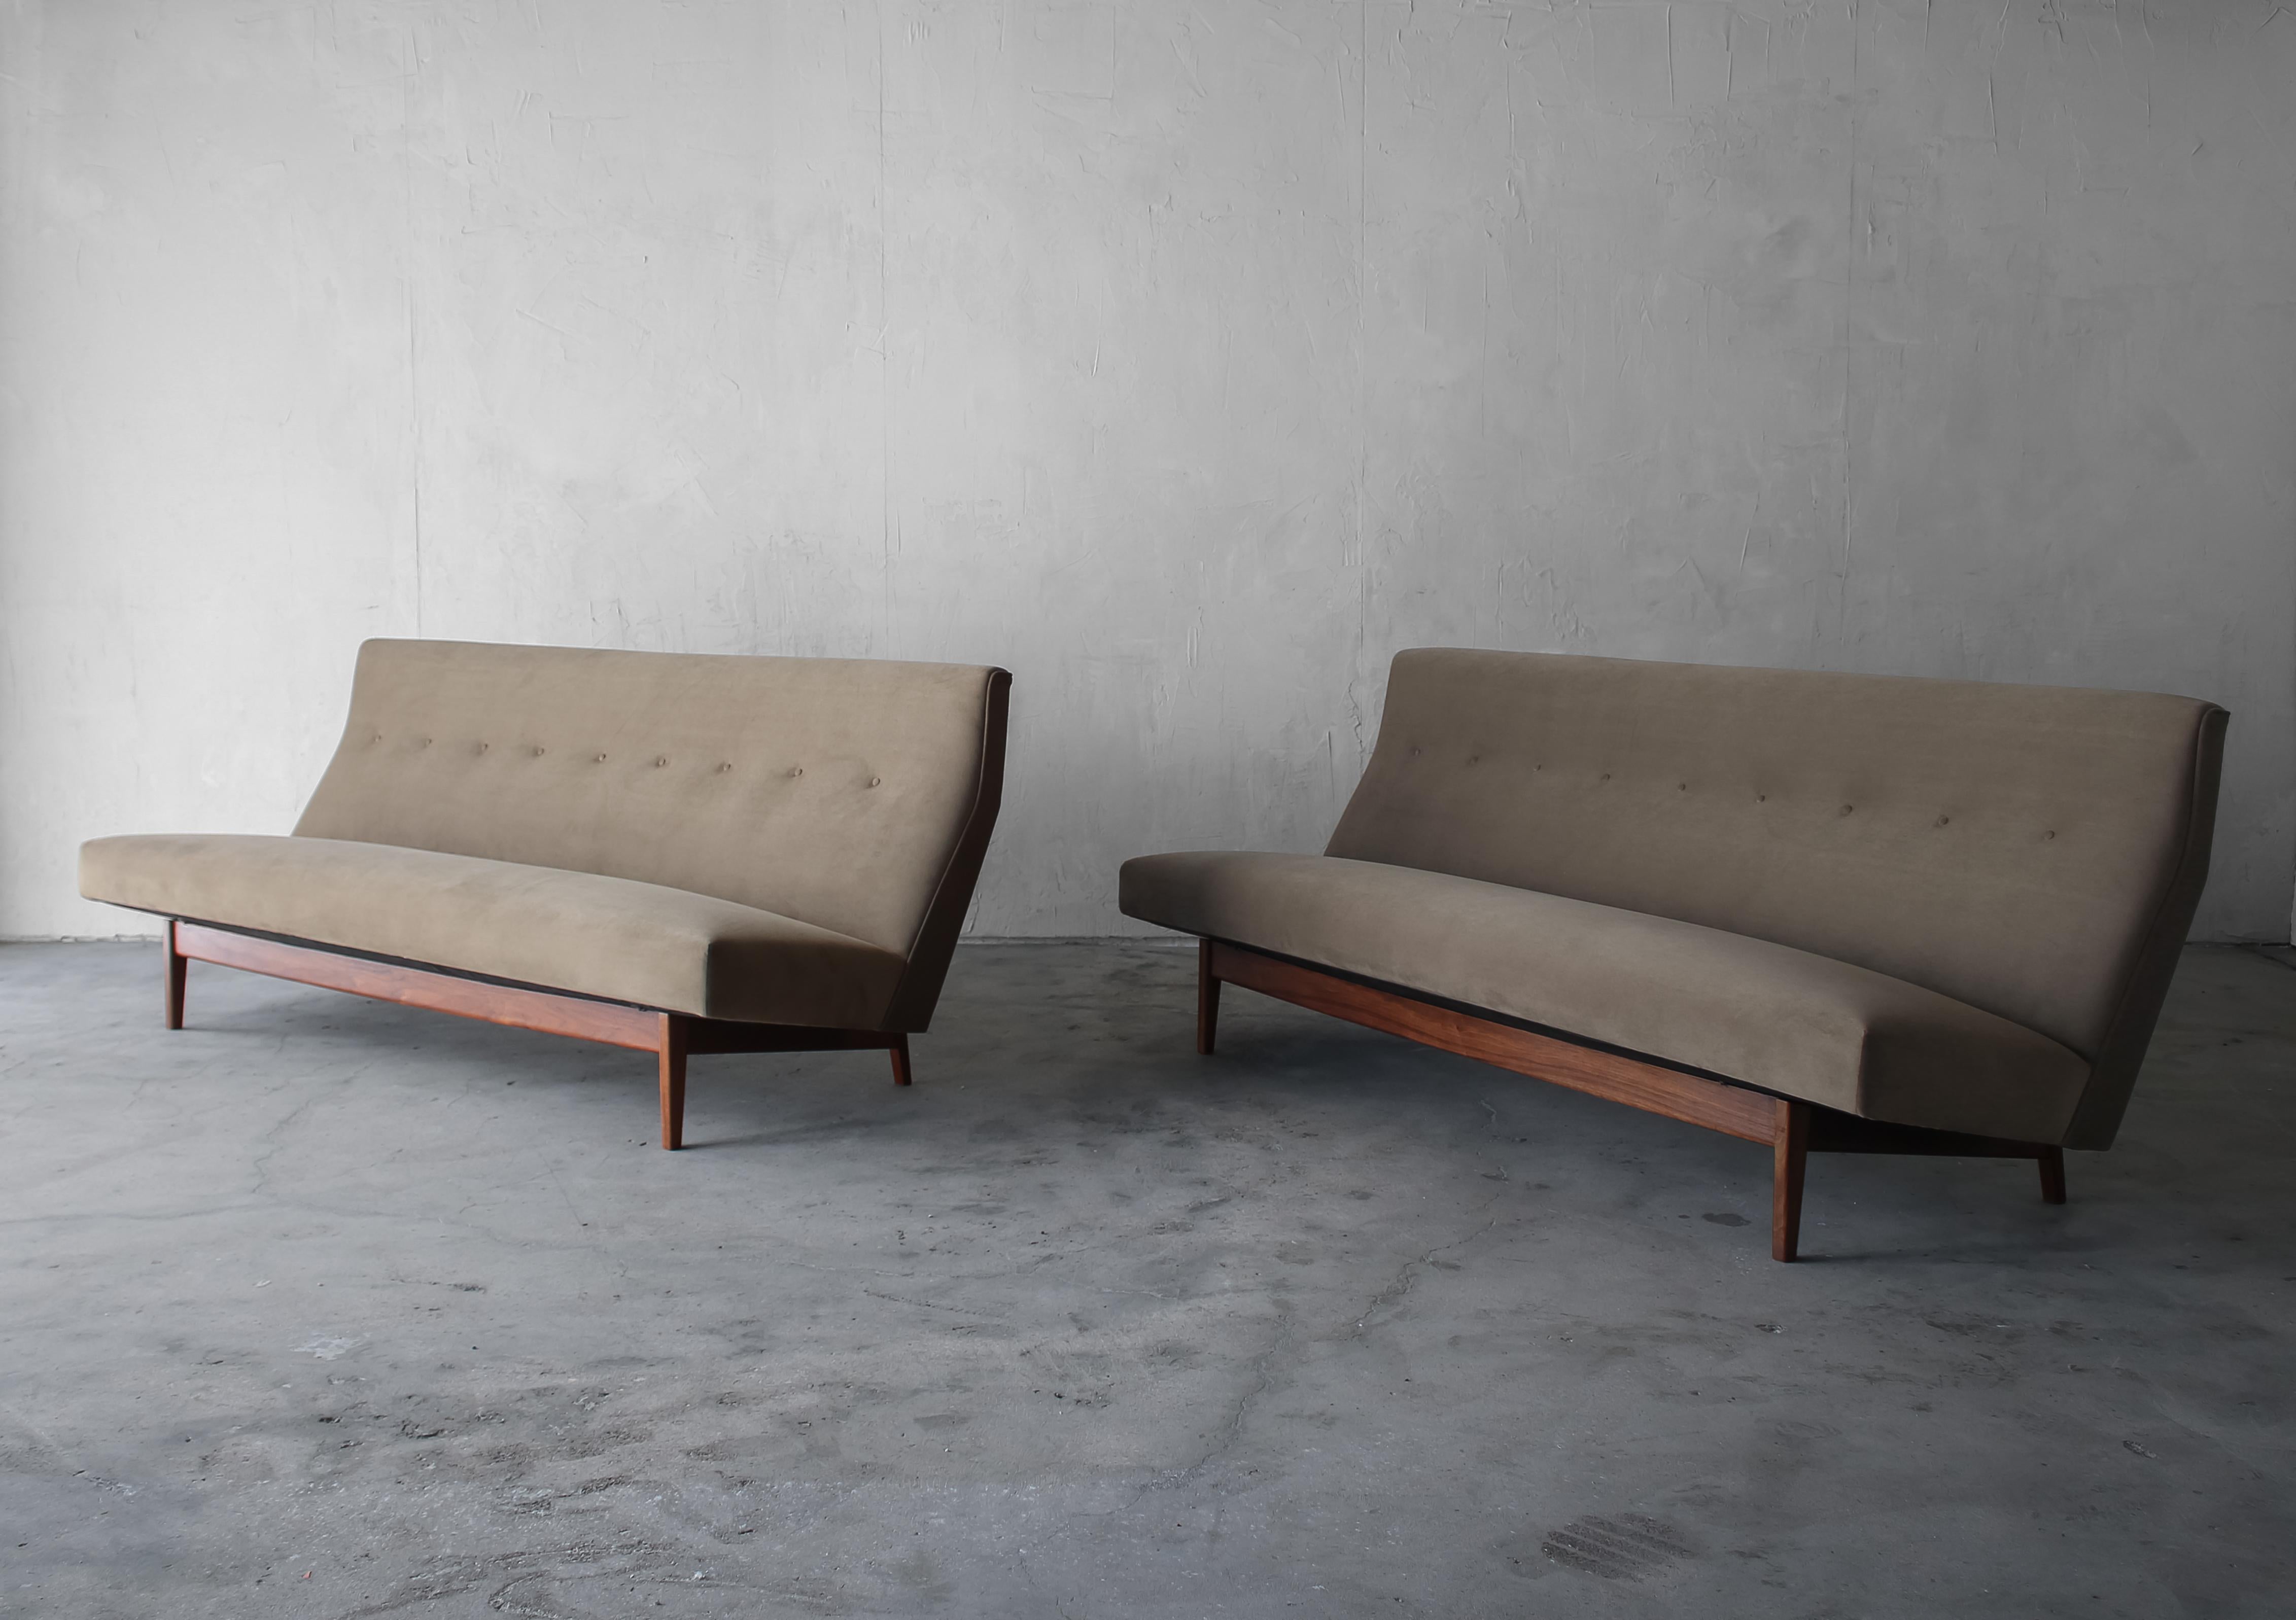 Walnut Model 250 Armless Sofa by Jens Risom - 2 Available For Sale